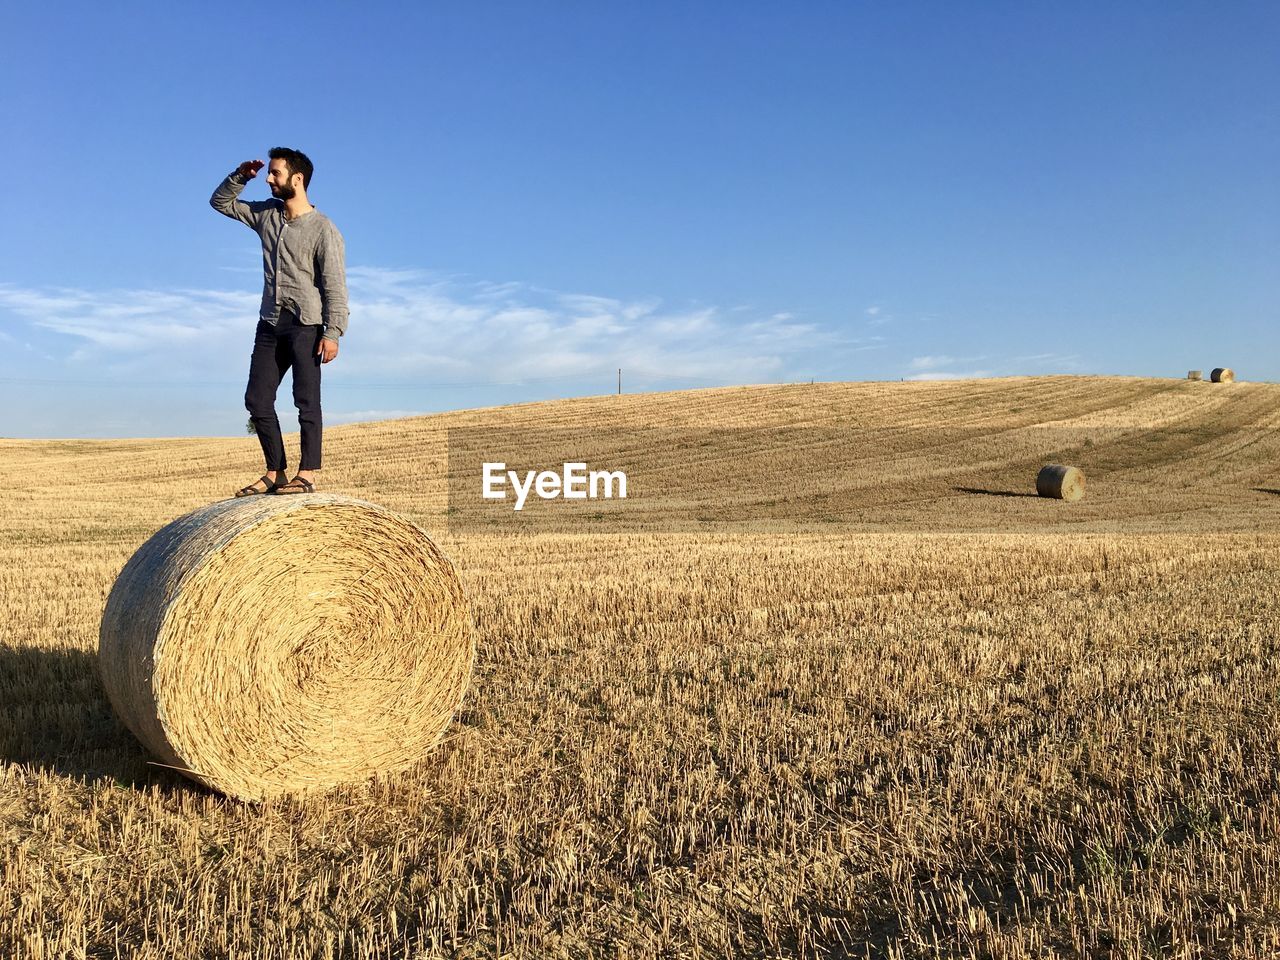 Man with hay bales on field against sky